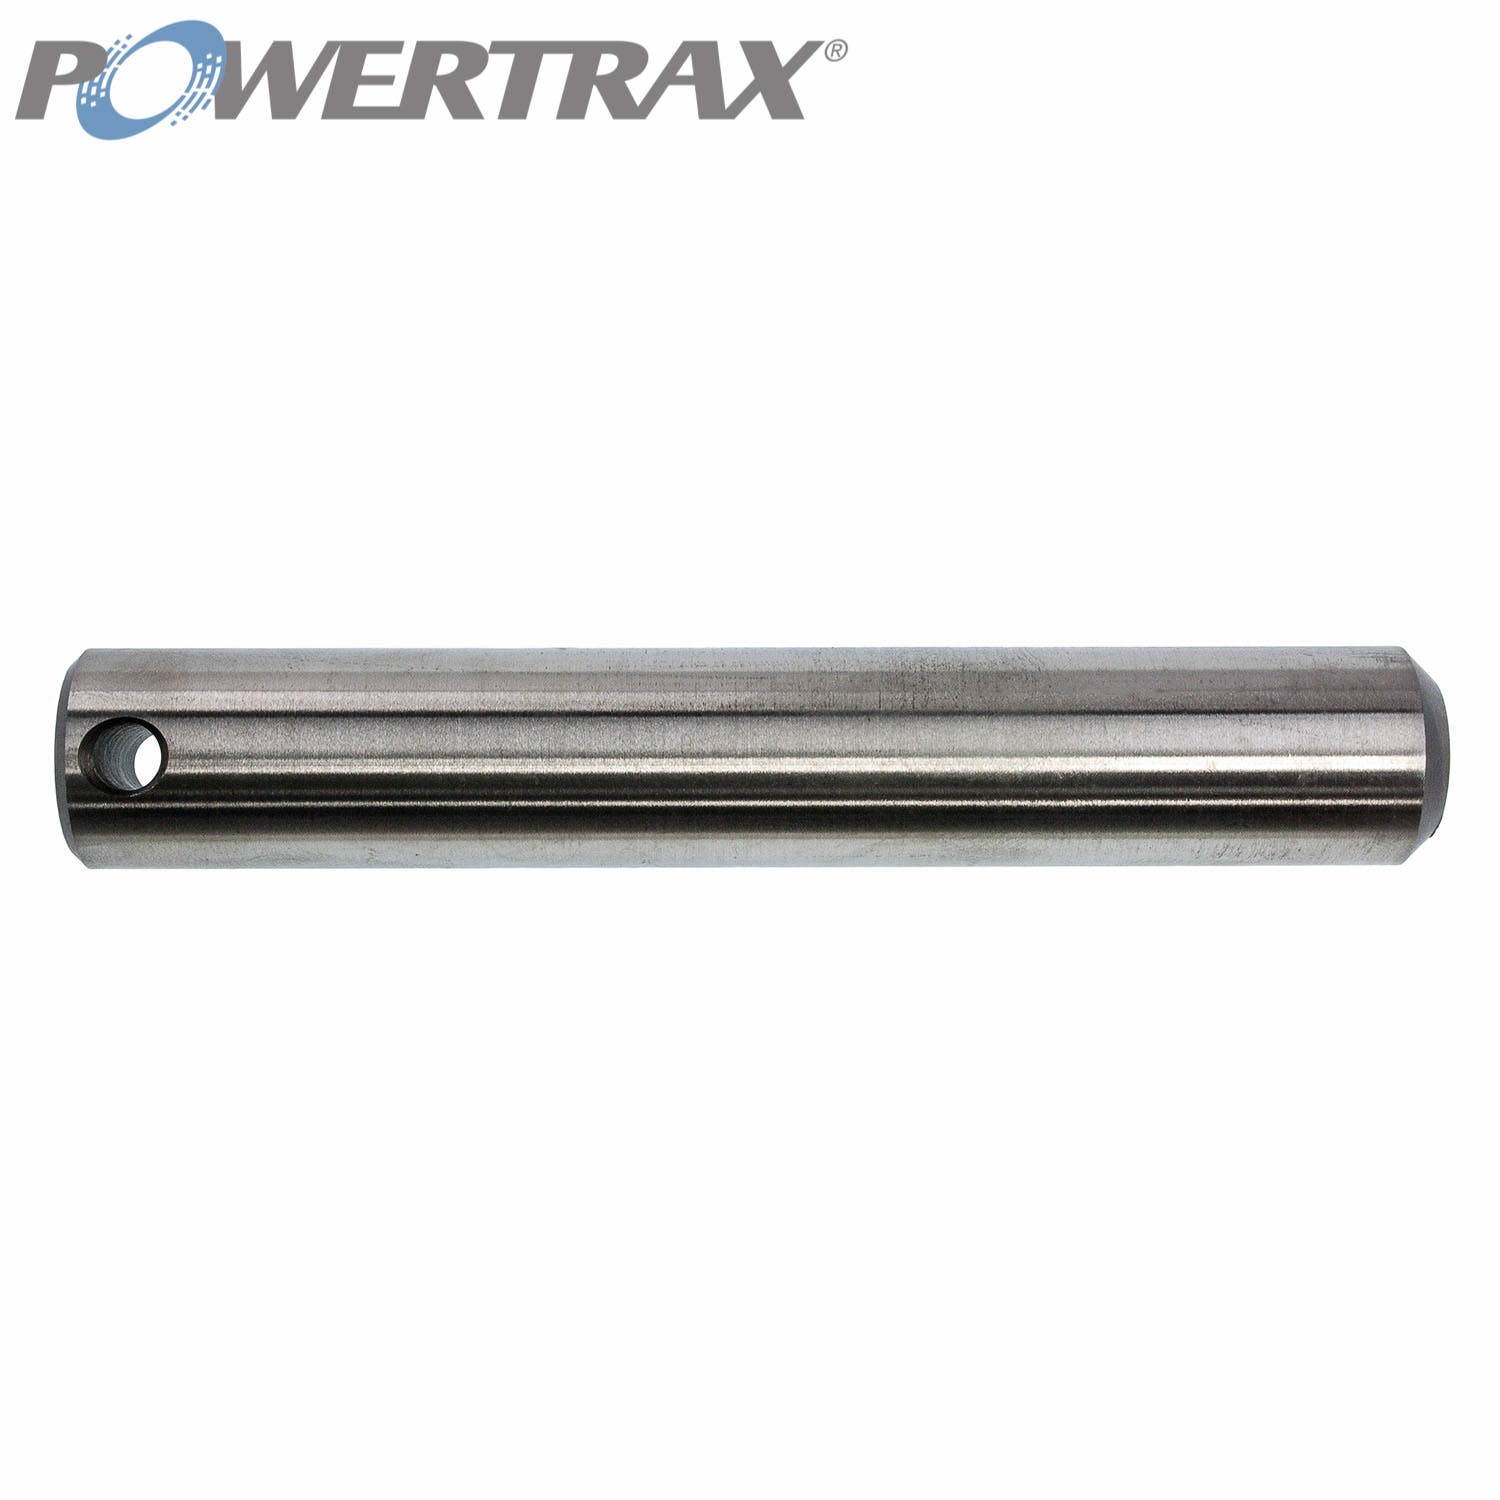 PowerTrax SD2310 Differential Pinion Shaft